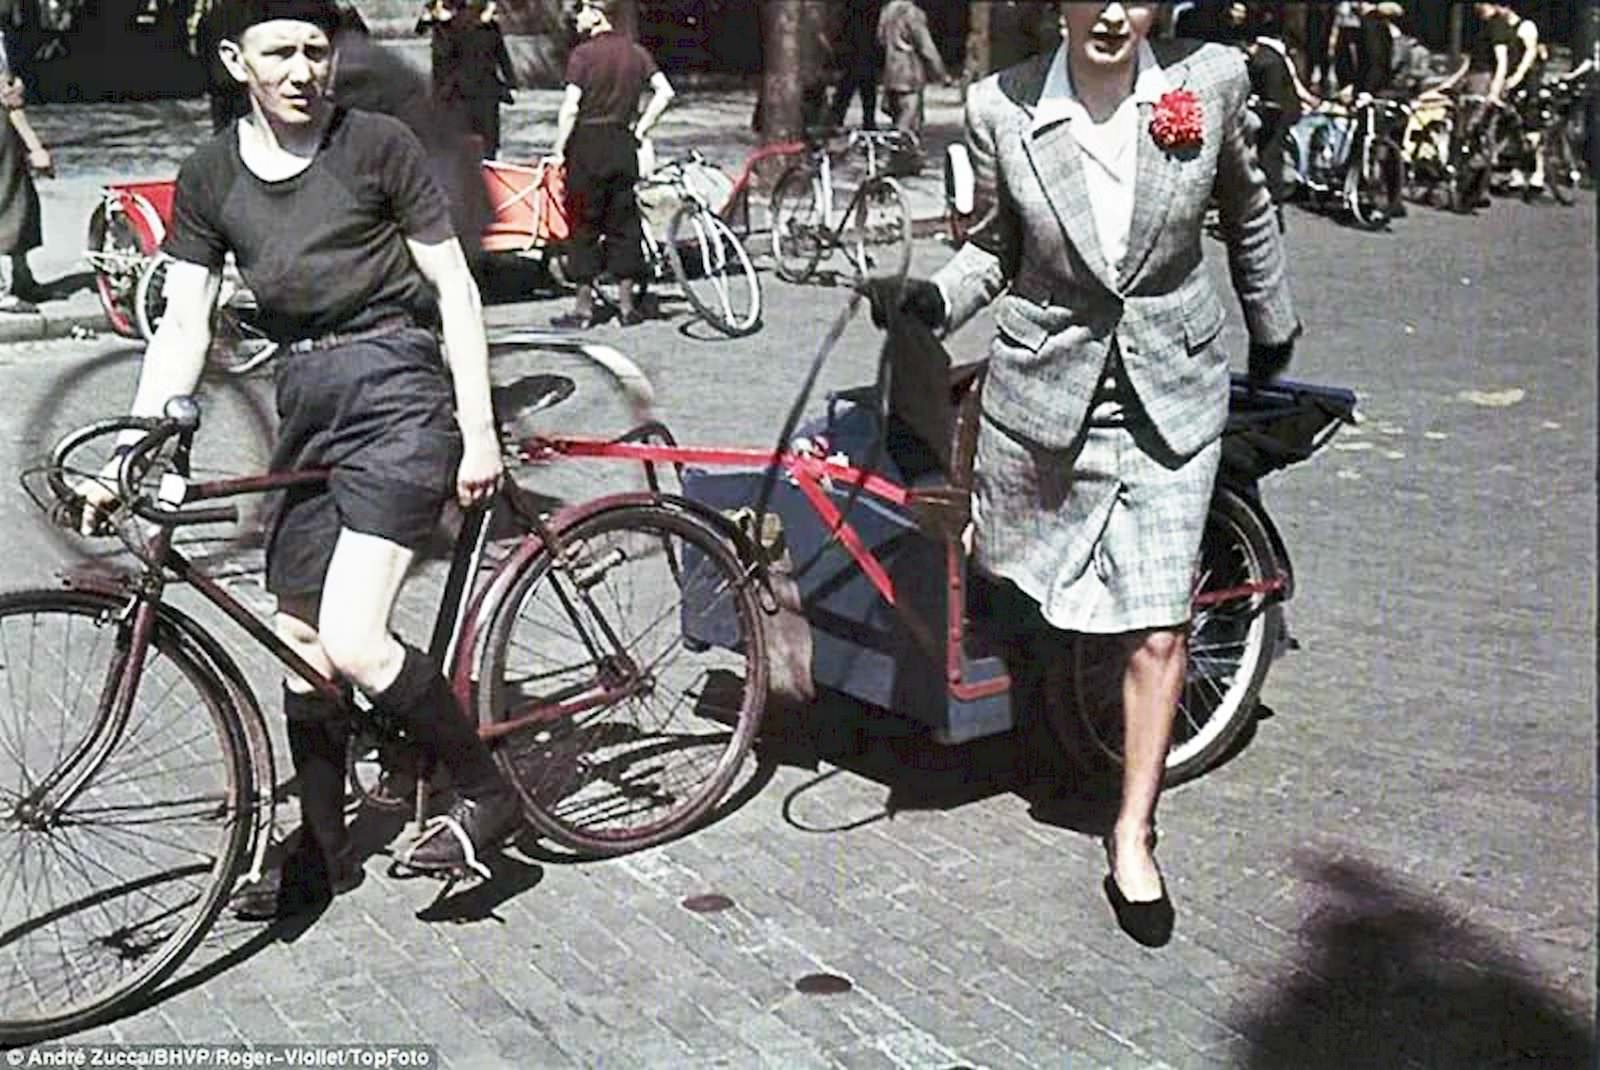 A smartly dressed woman steps from a bicycle taxi.